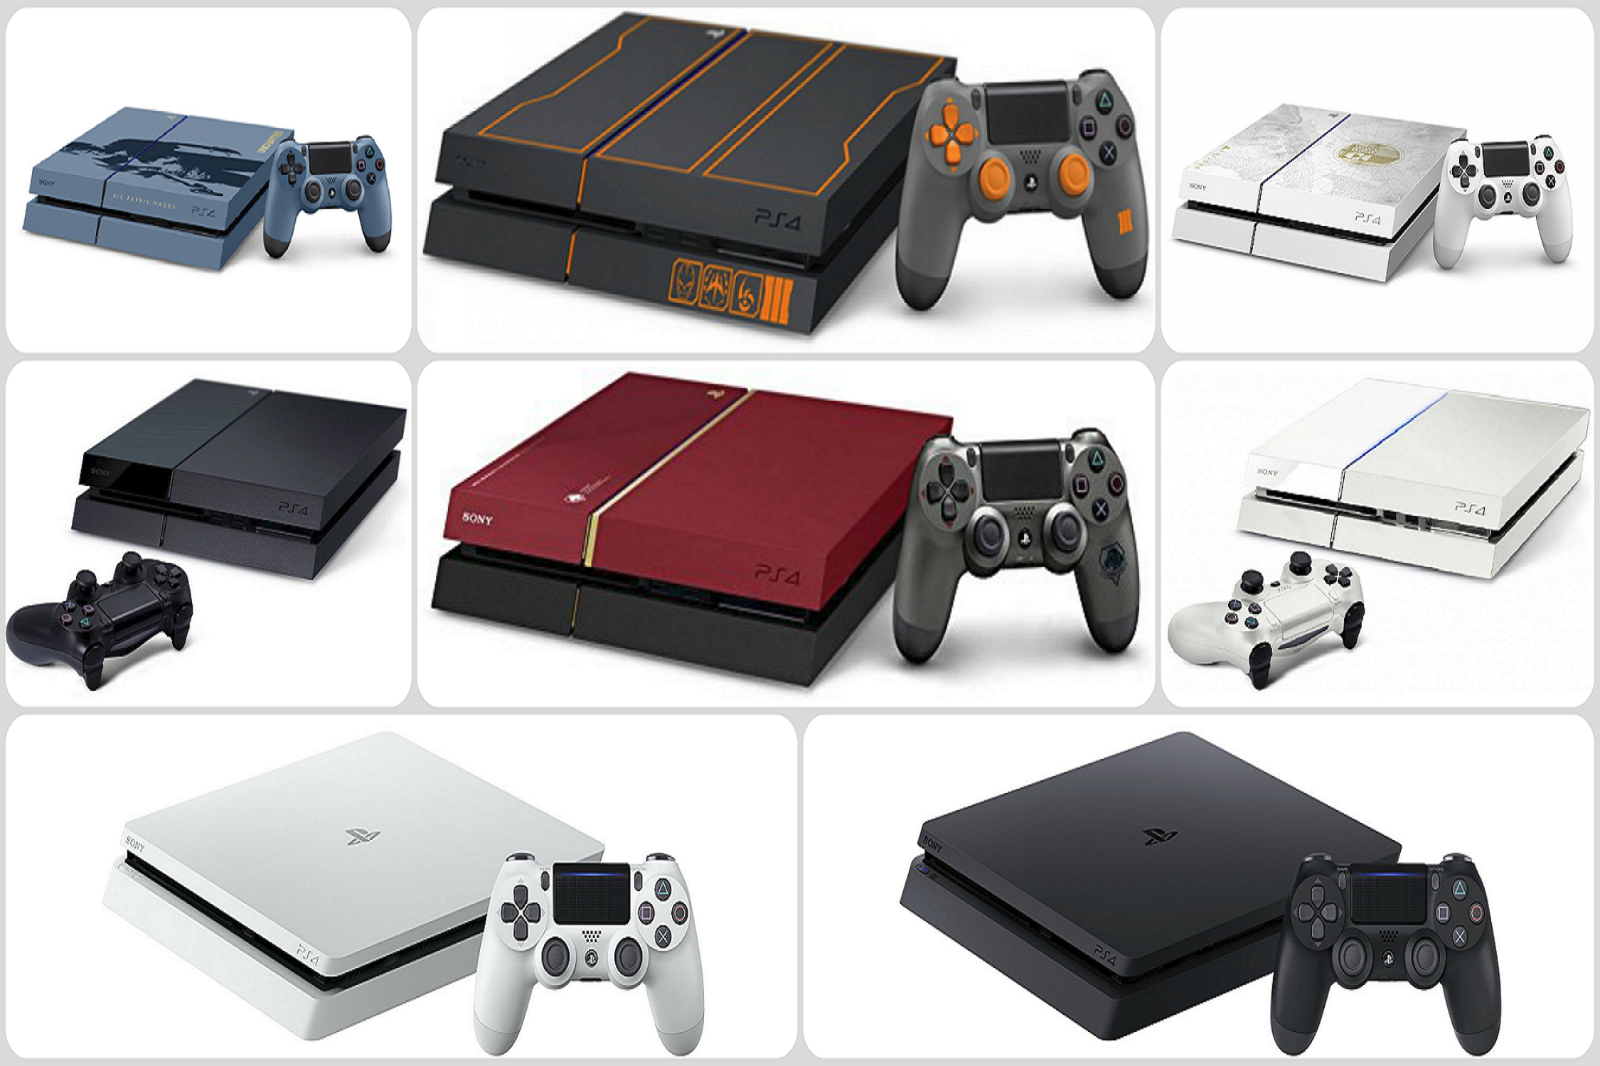 Ps4 extra. Сони плейстейшен 4. Sony PLAYSTATION 4 Slim. Ps4 Slim Limited Edition. Ps4 Limited Edition ps1.